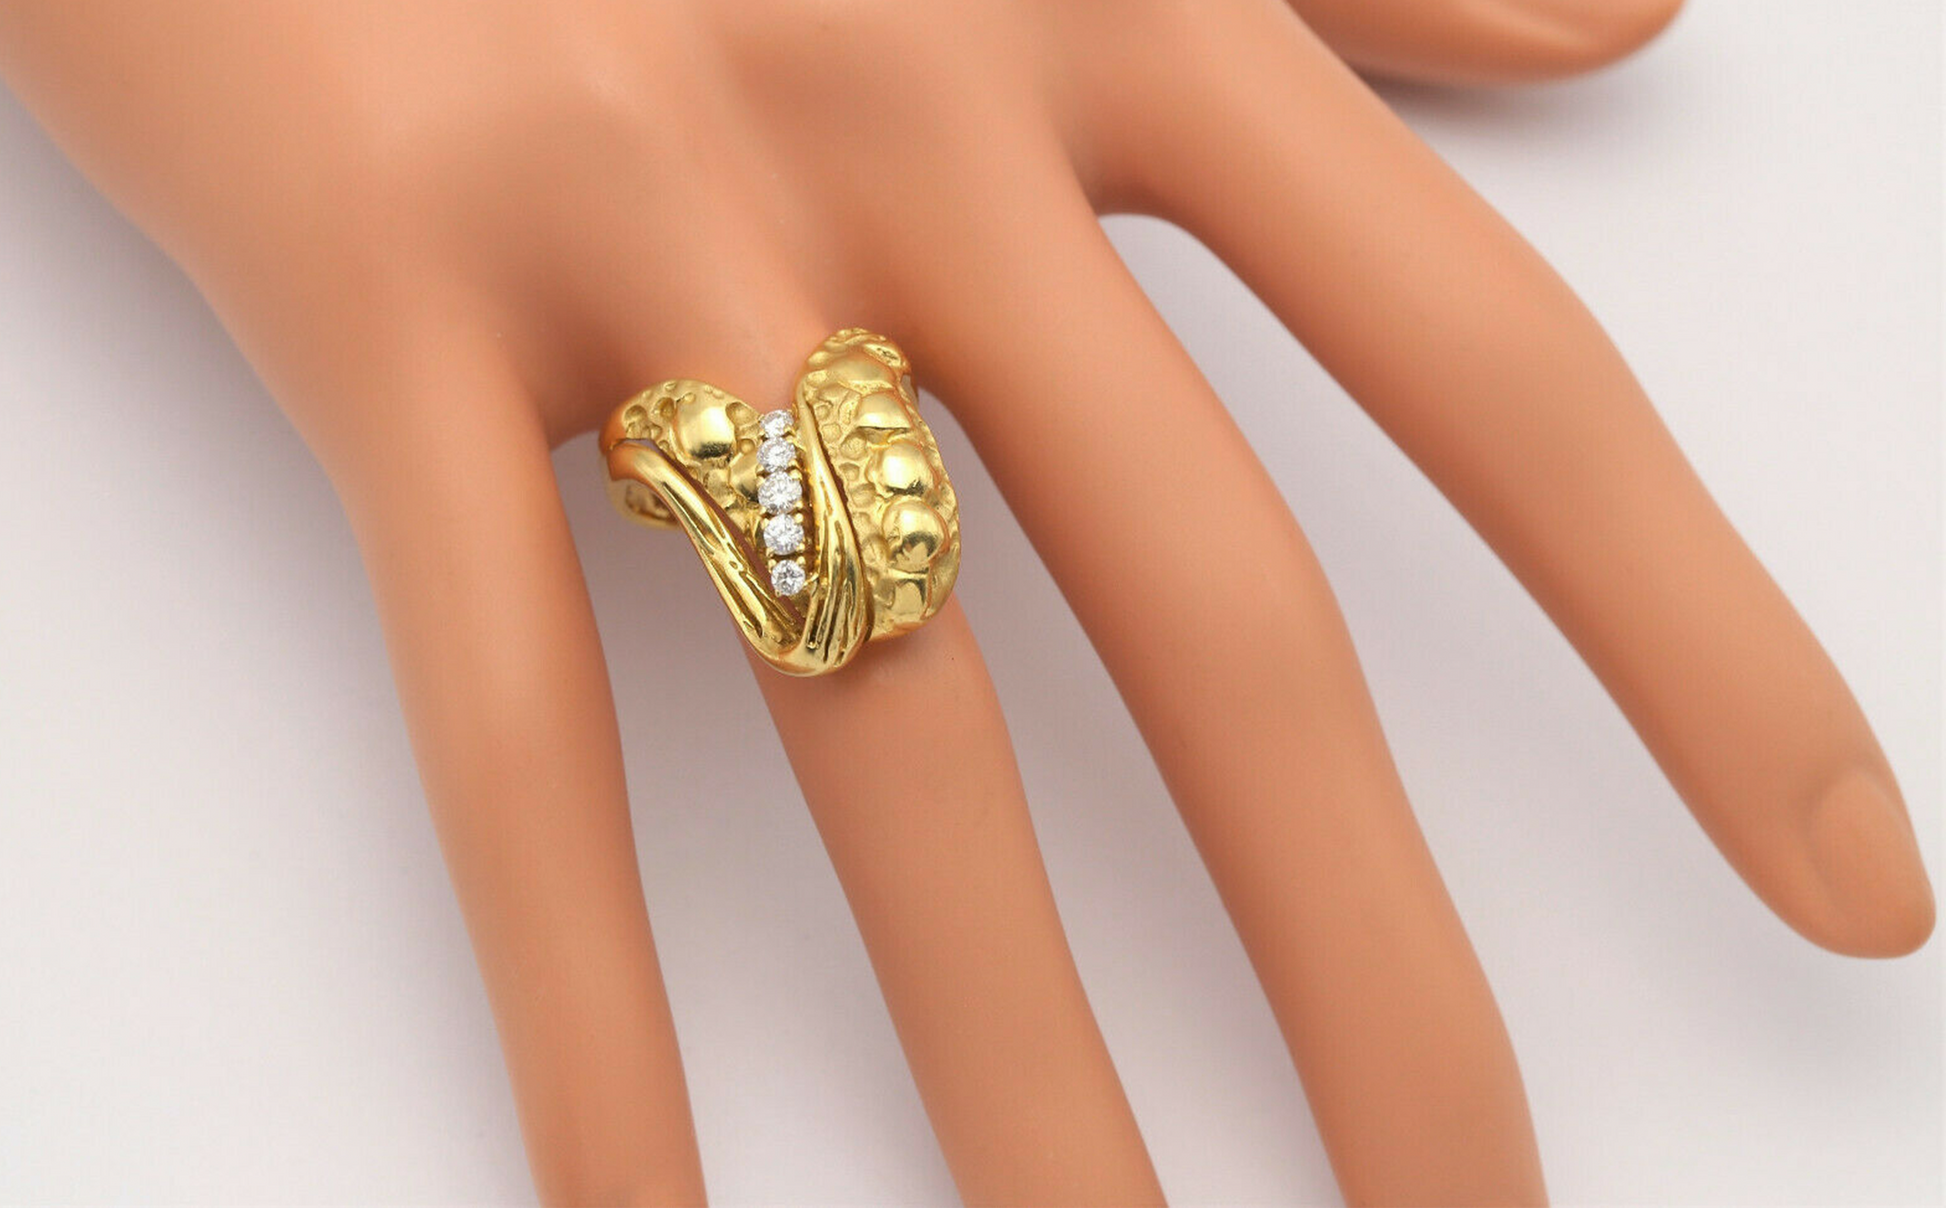 Arab Gold Color Free Size Ring For Women/Teenager,Middle East Dubai Wedding  Jewelry Ethiopian African Party Gift #093806 From Autothings, $12.64 |  DHgate.Com